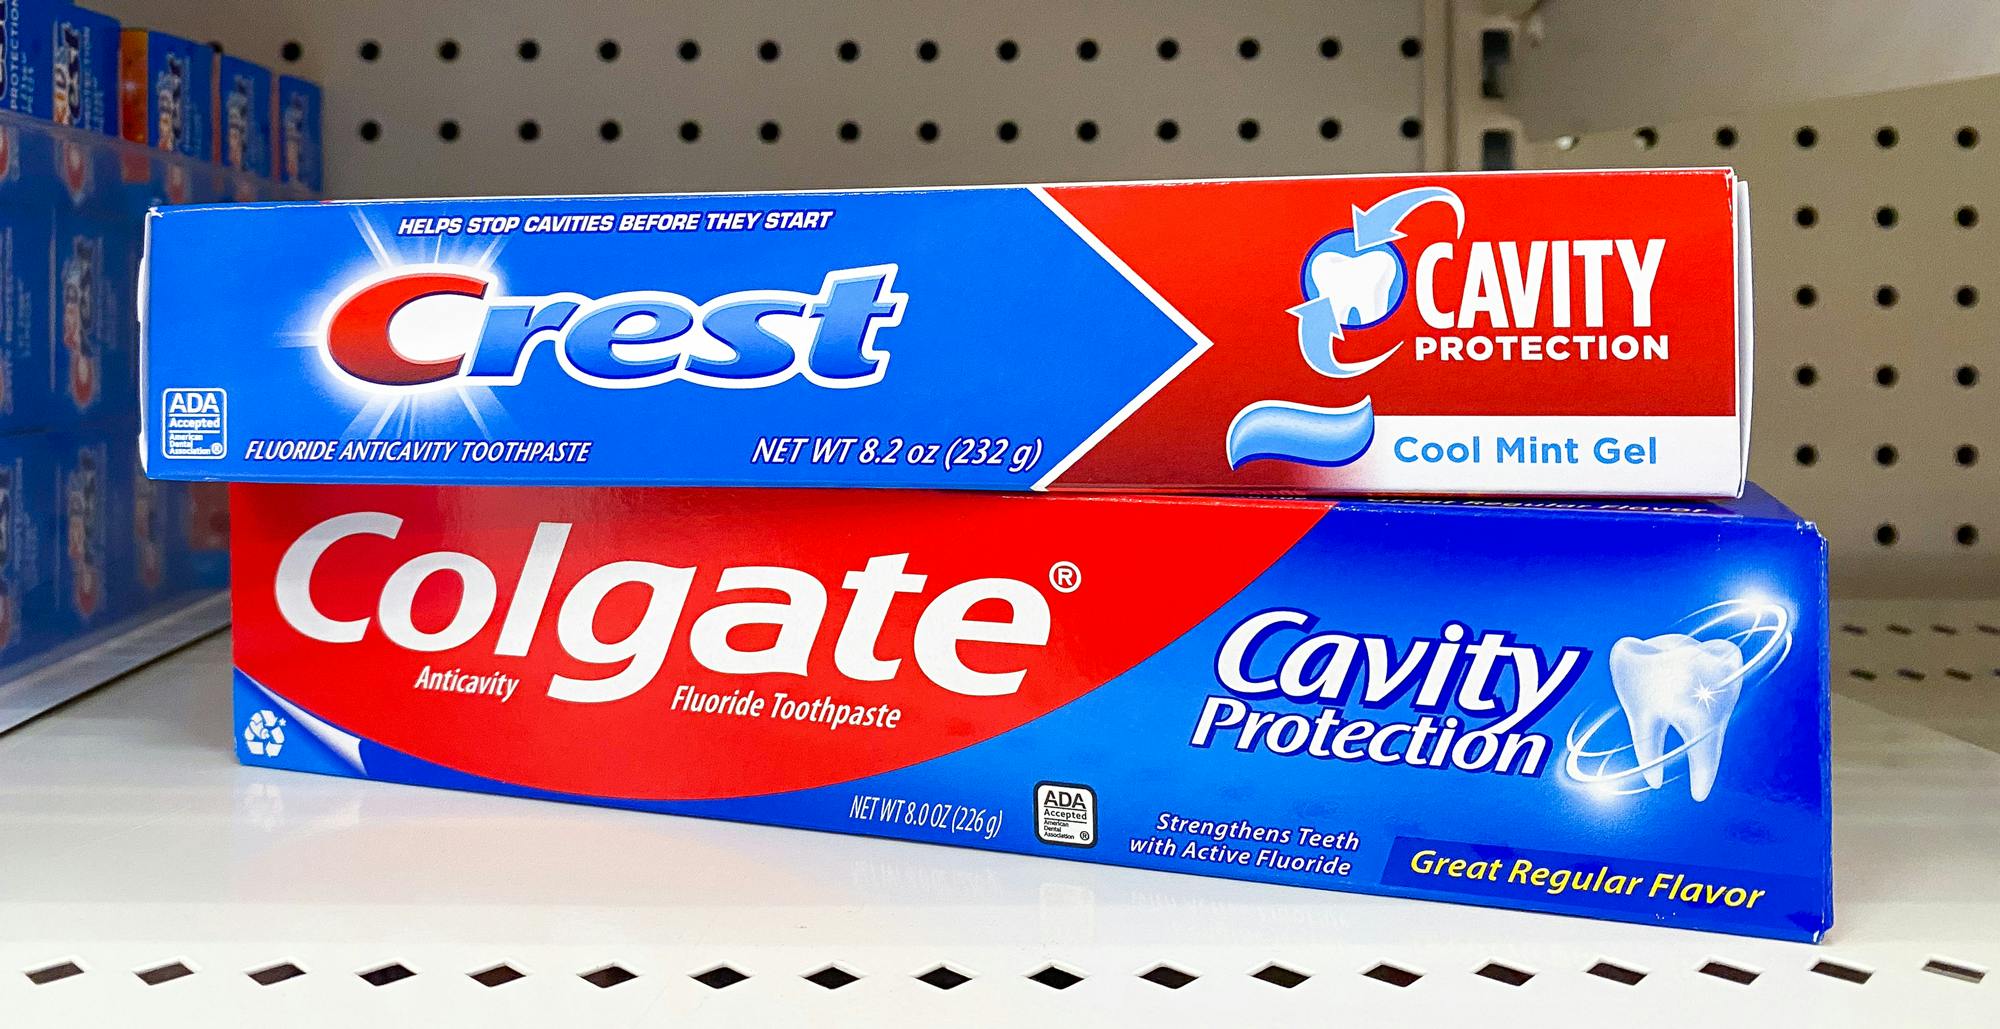 Crest vs Colgate: Which Toothpaste Is Cheaper?